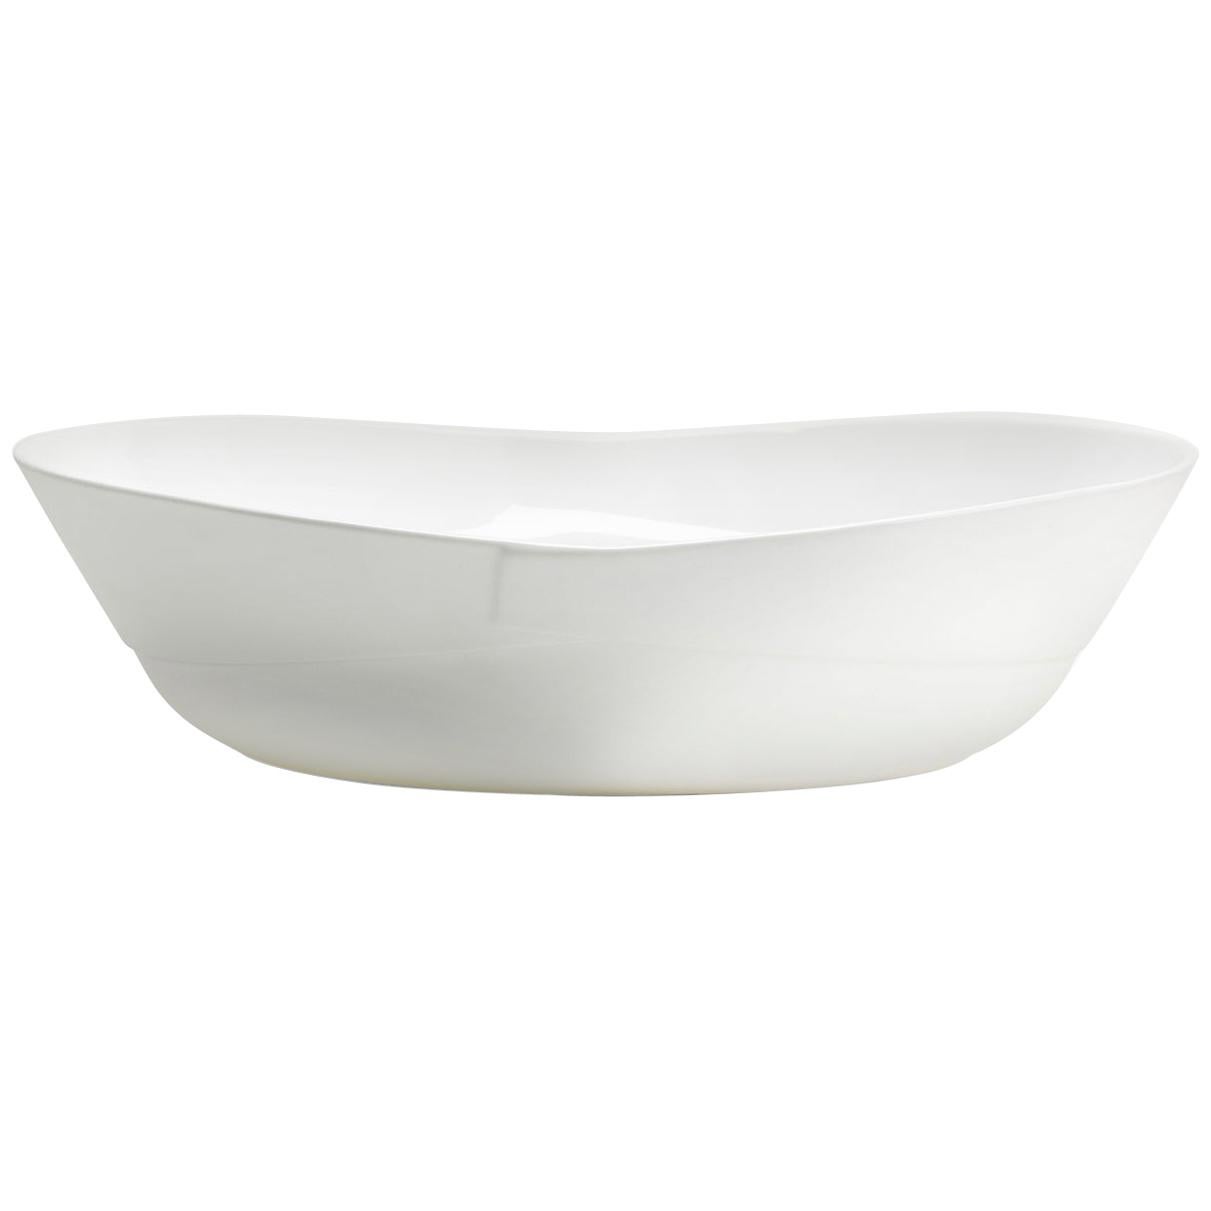 Fine Bone China Large Shallow Bowl Sculpted with Generous and Curvaceous Forms